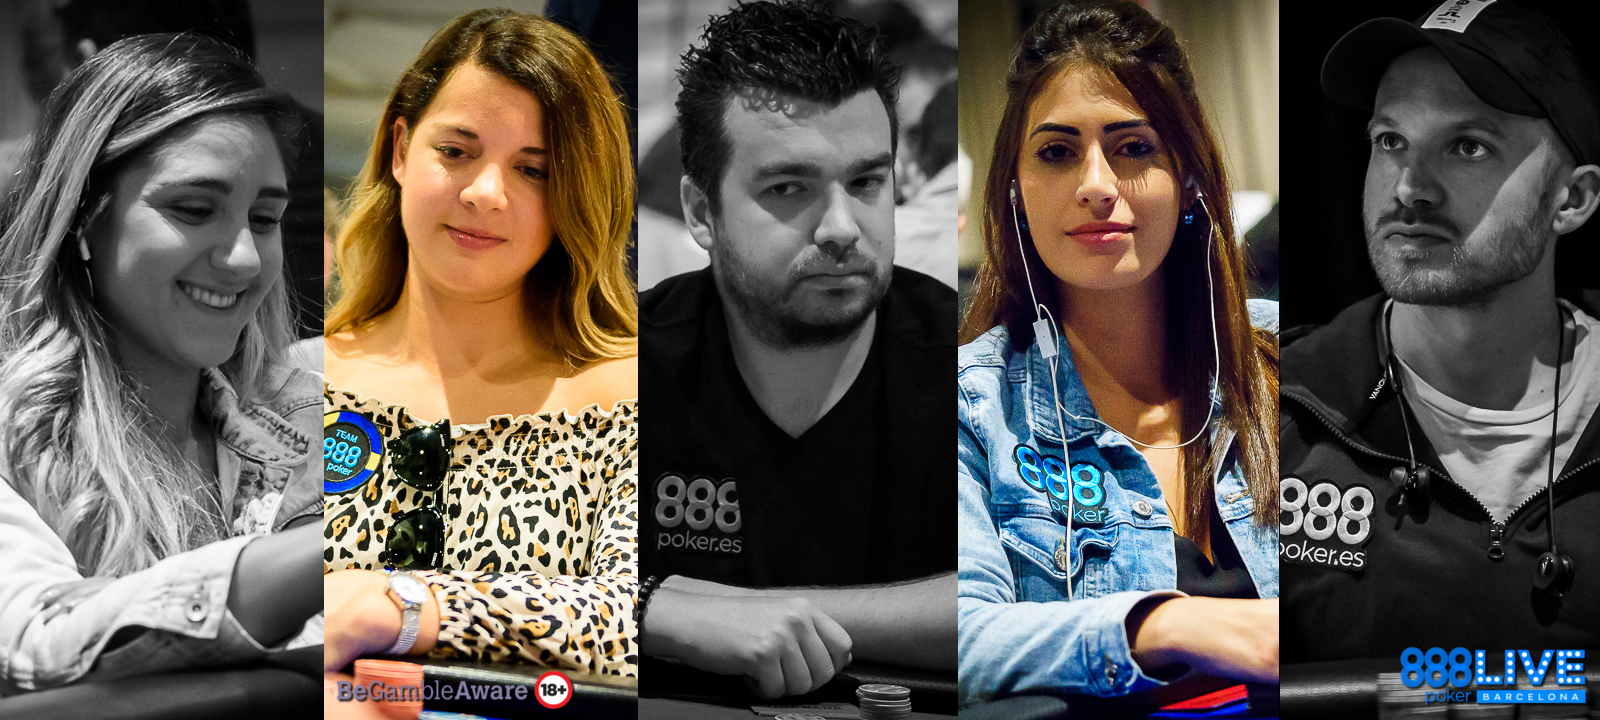 Day 1A Brings Out the Team888 Pros at 888pokerLIVEBCN